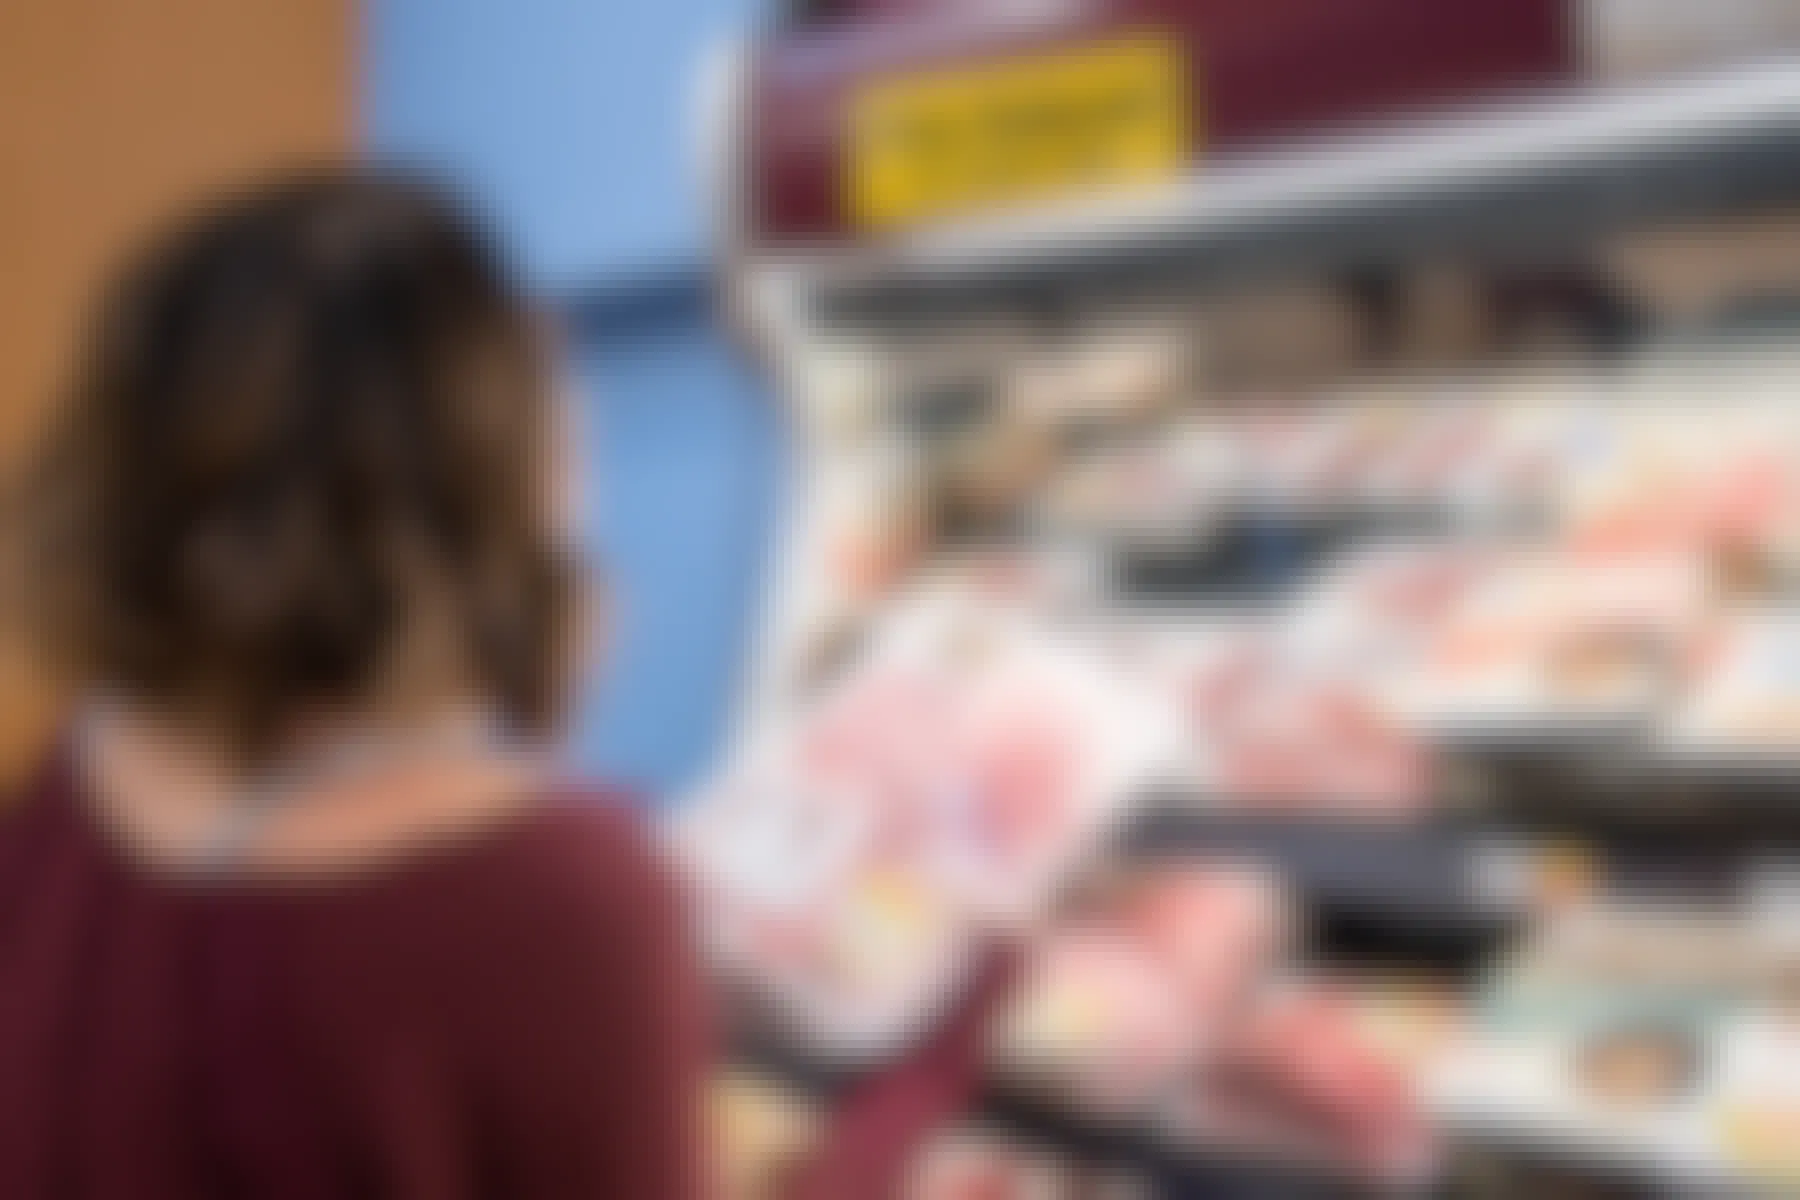 Shop for markdown meat mid-morning to save at least 25% at Kroger.